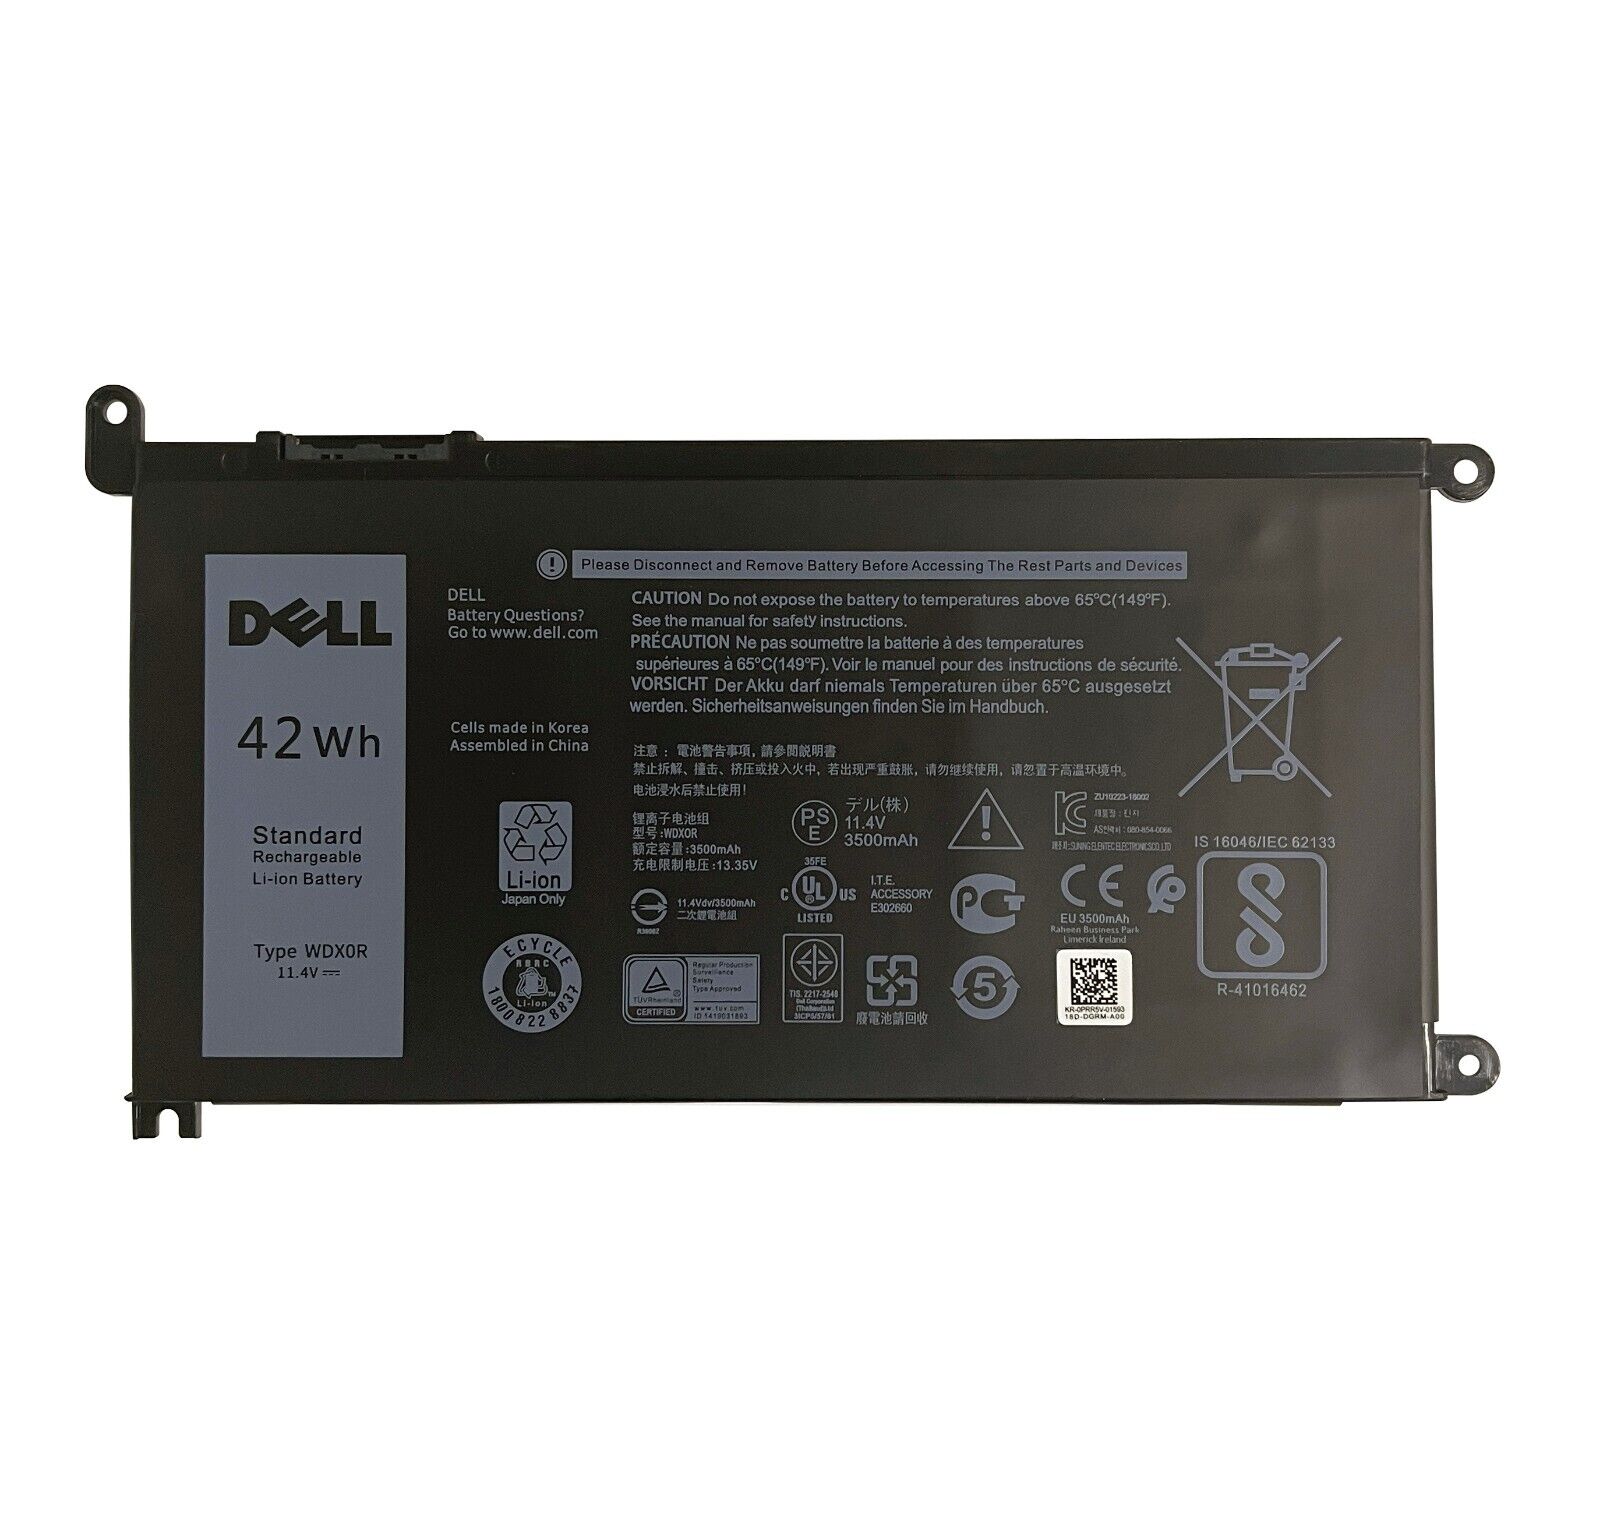 NEW OEM 42Wh WDX0R Battery For Dell Inspiron 15 7000 7579 7570 17 5000 5765 5767